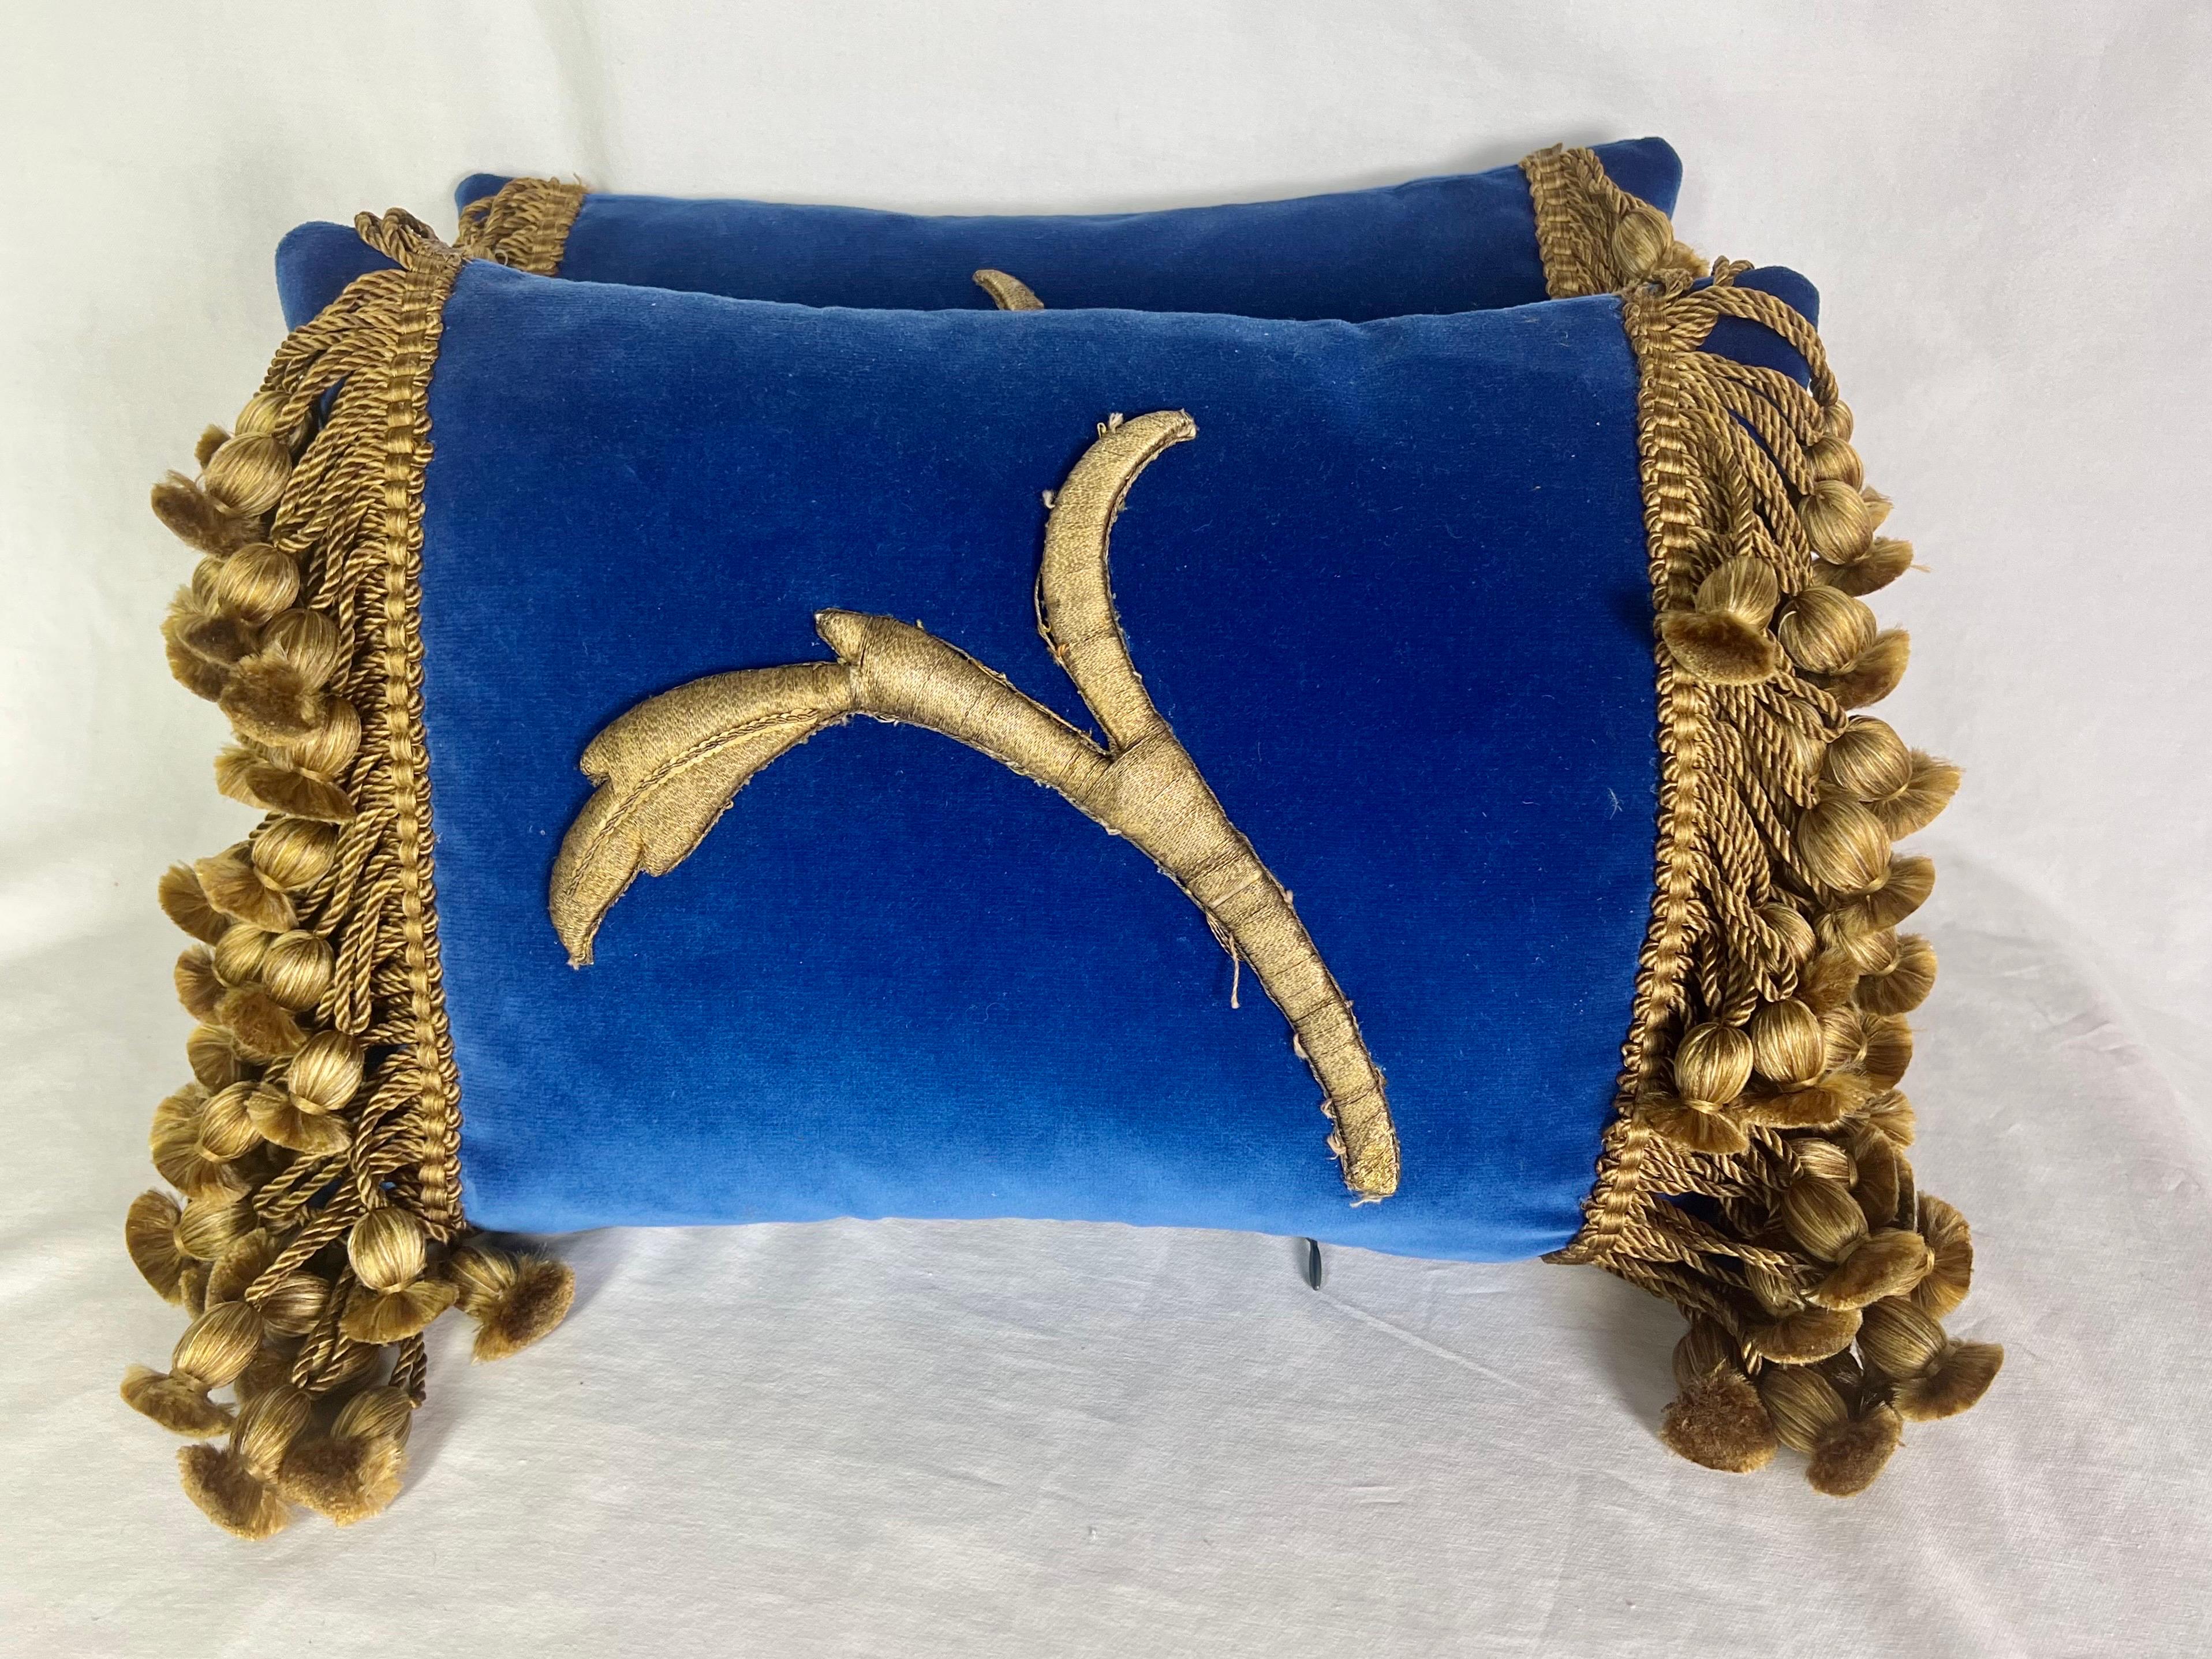 Pair of contemporary bark blue velvet pillows decorated with metallic thread acanthus leaf appliques and a golden colored tassel fringe on the ends.